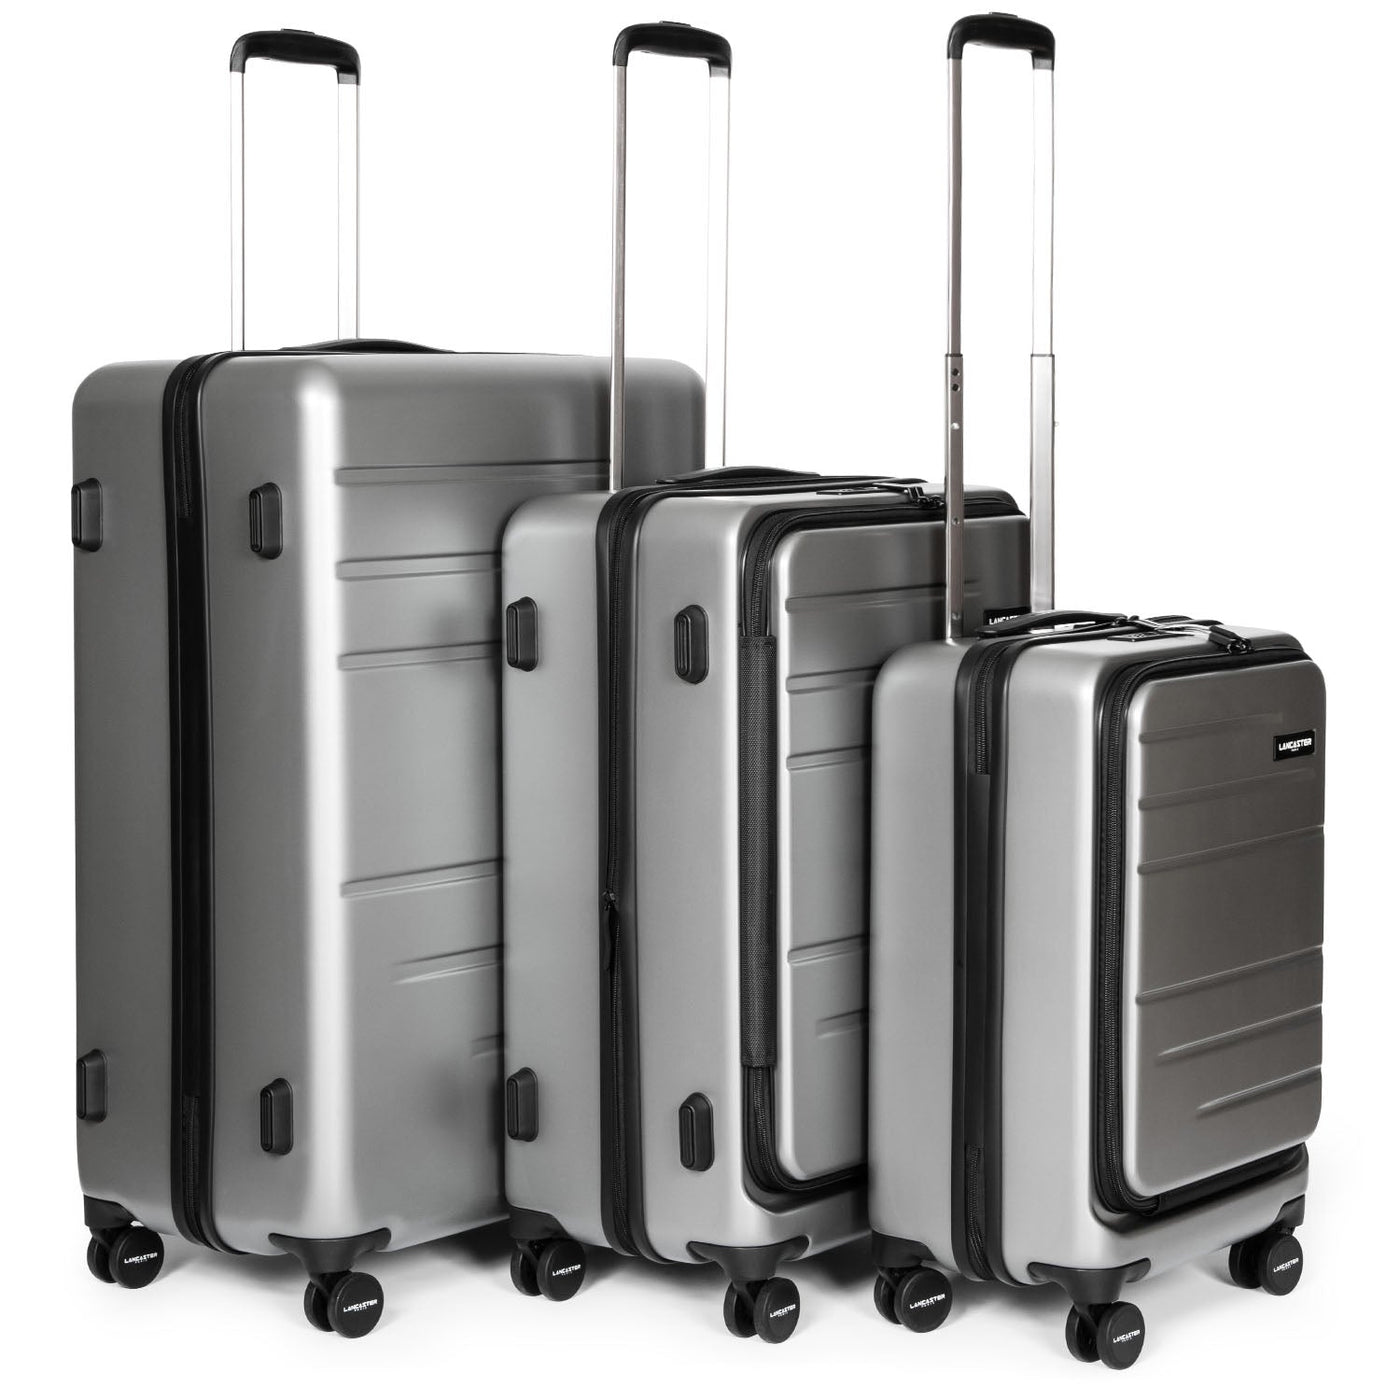 assortment of 3 luggage - luggage #couleur_etain